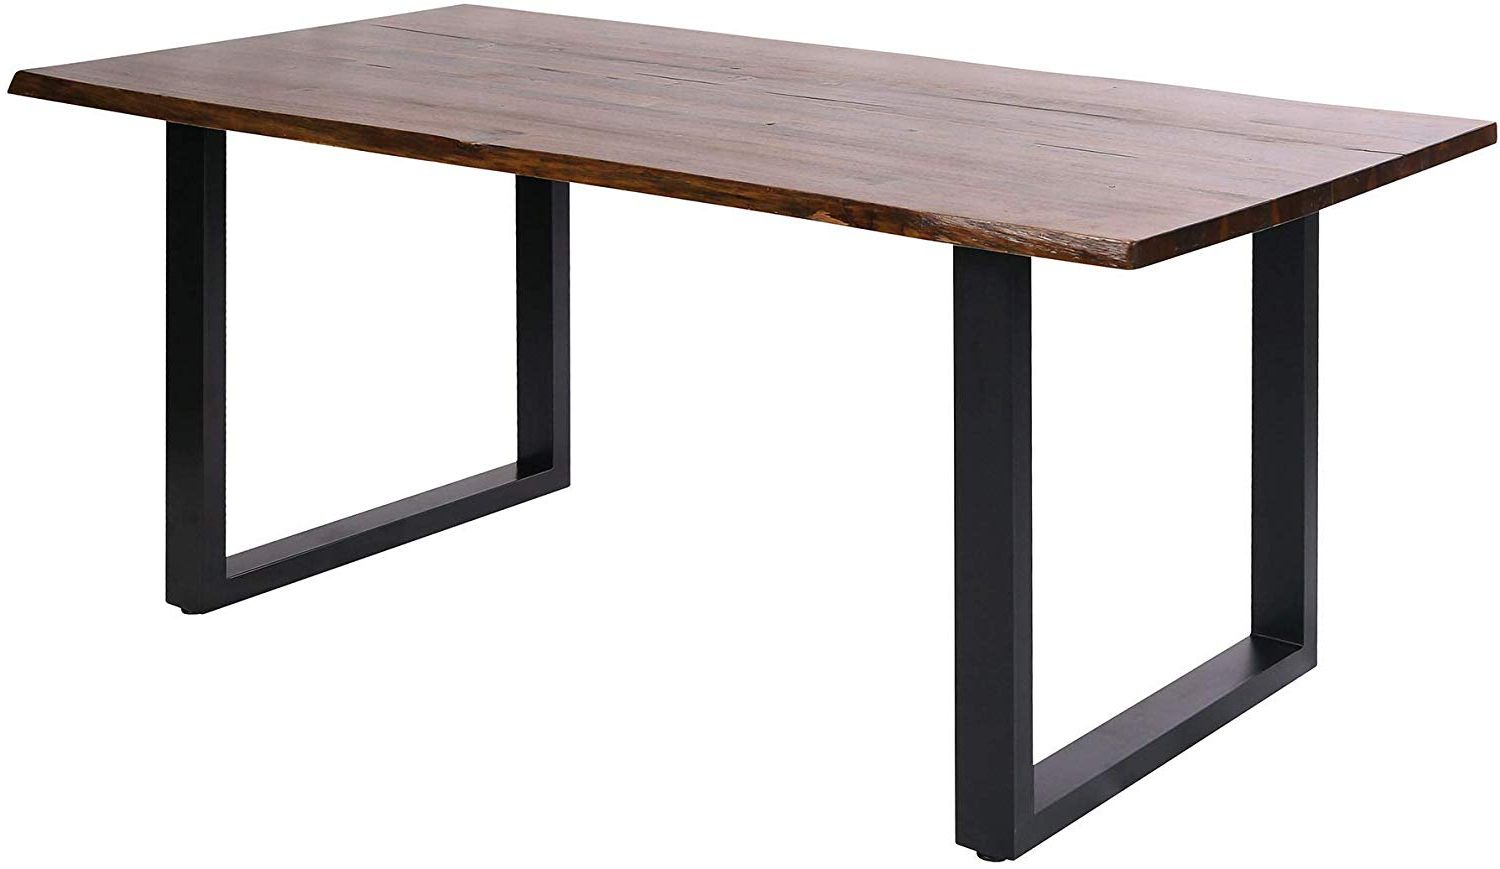 Fashionable Amazon: Living Edge Dining Table In Natural Stain And Inside Acacia Dining Tables With Black Legs (Photo 10 of 25)